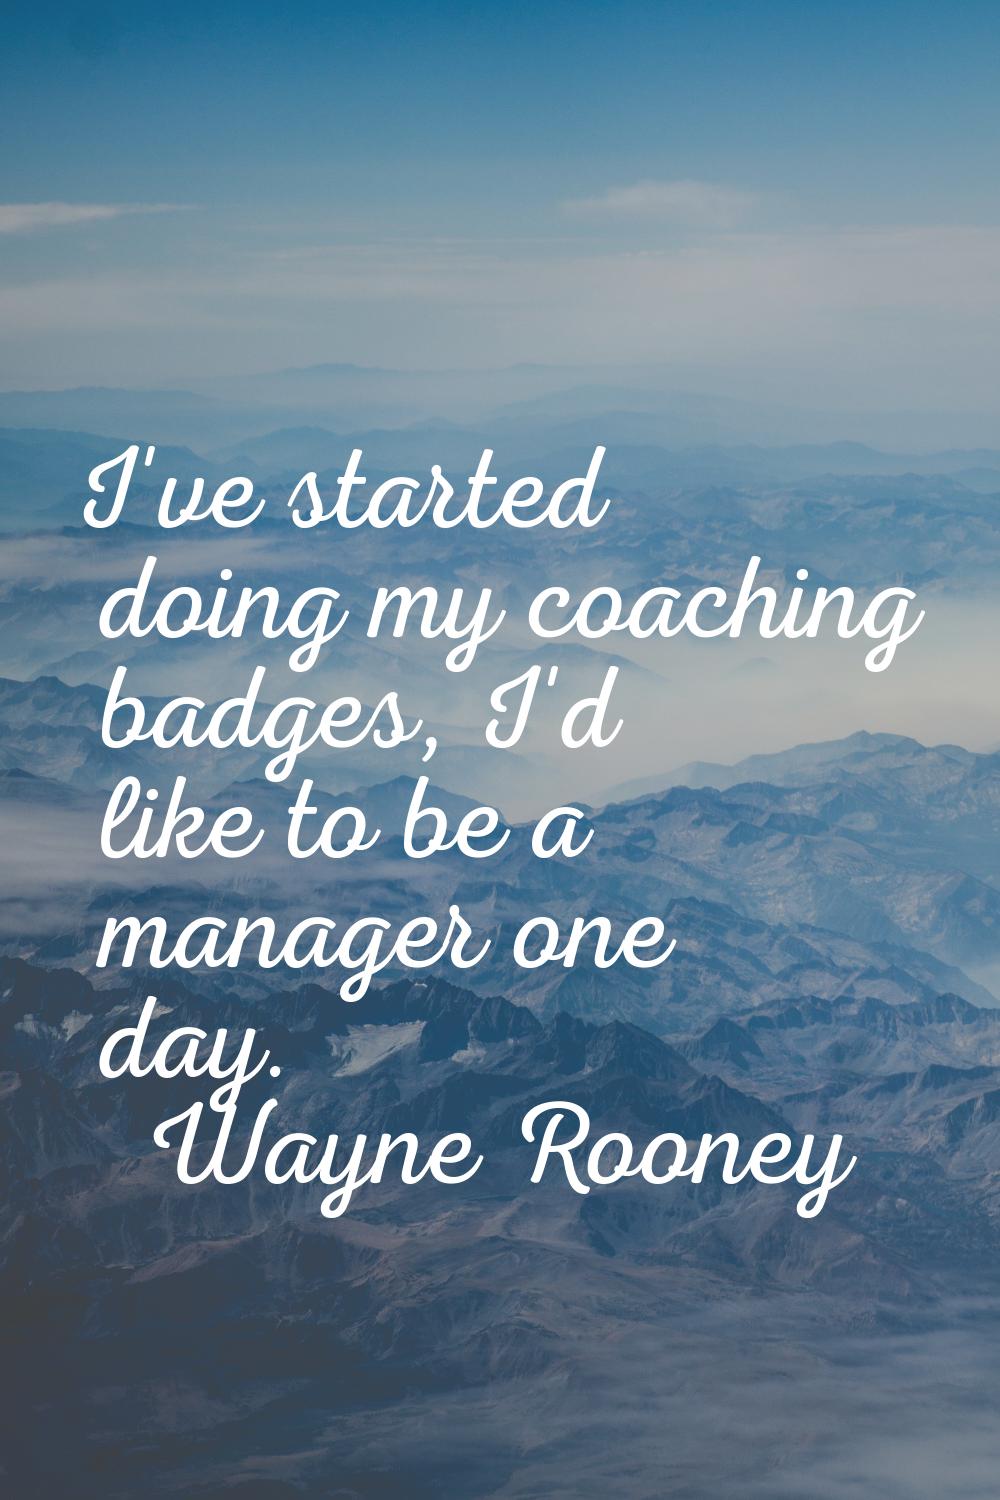 I've started doing my coaching badges, I'd like to be a manager one day.